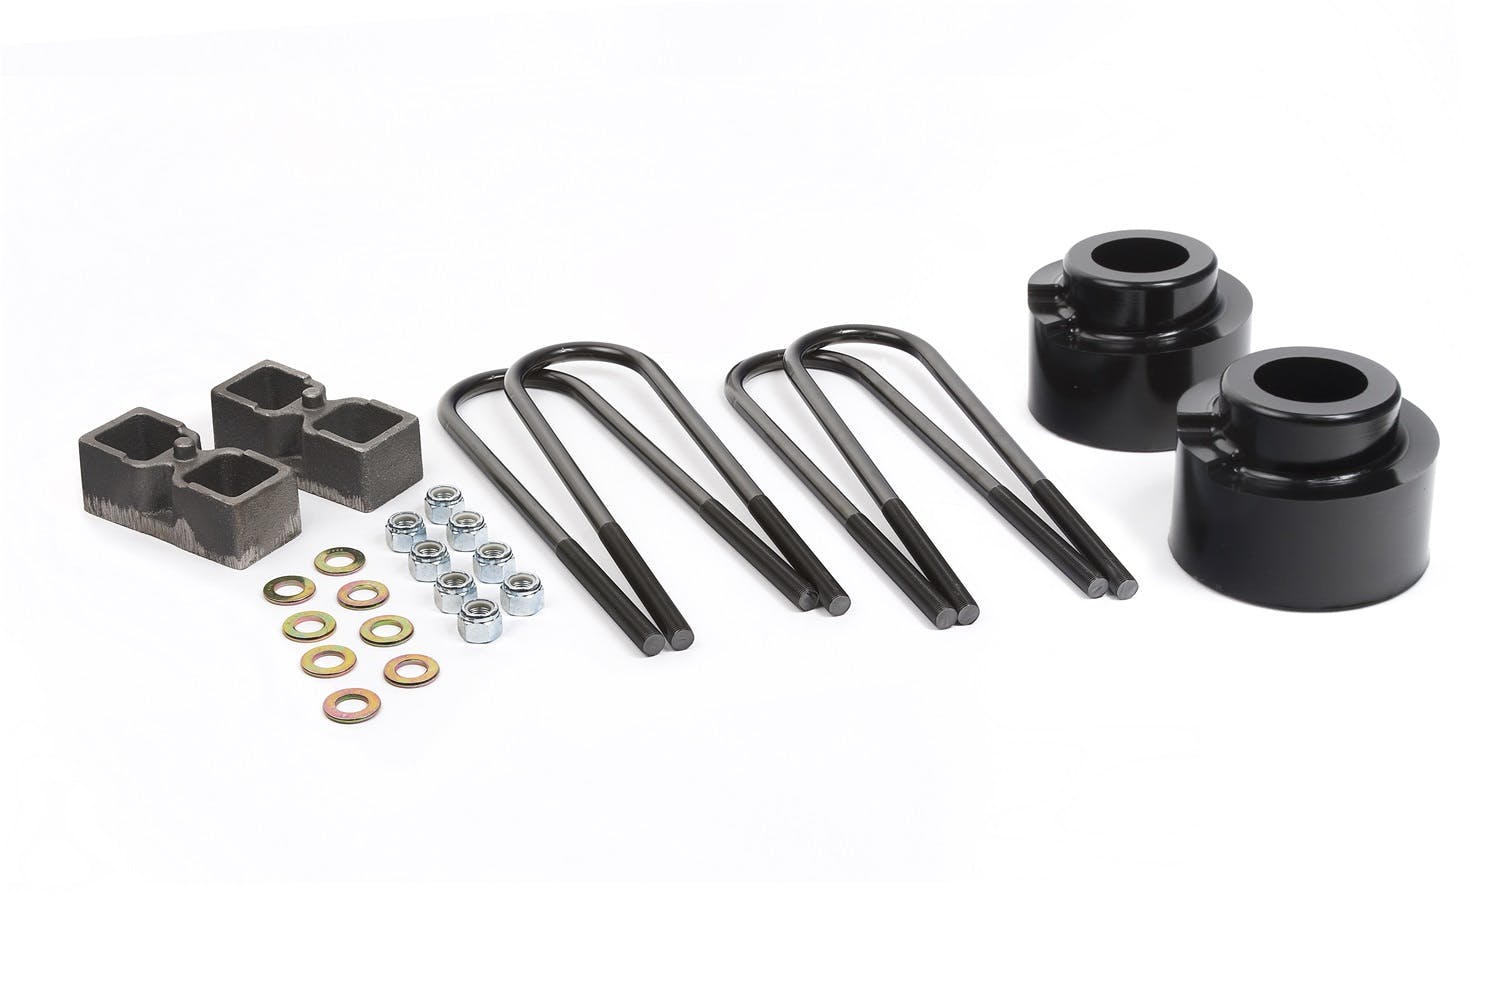 Daystar KF09128BK Suspension Lift Kit; 2.5 inch Front Coil Spring Spacers; 2 inch Rear Lift Blocks